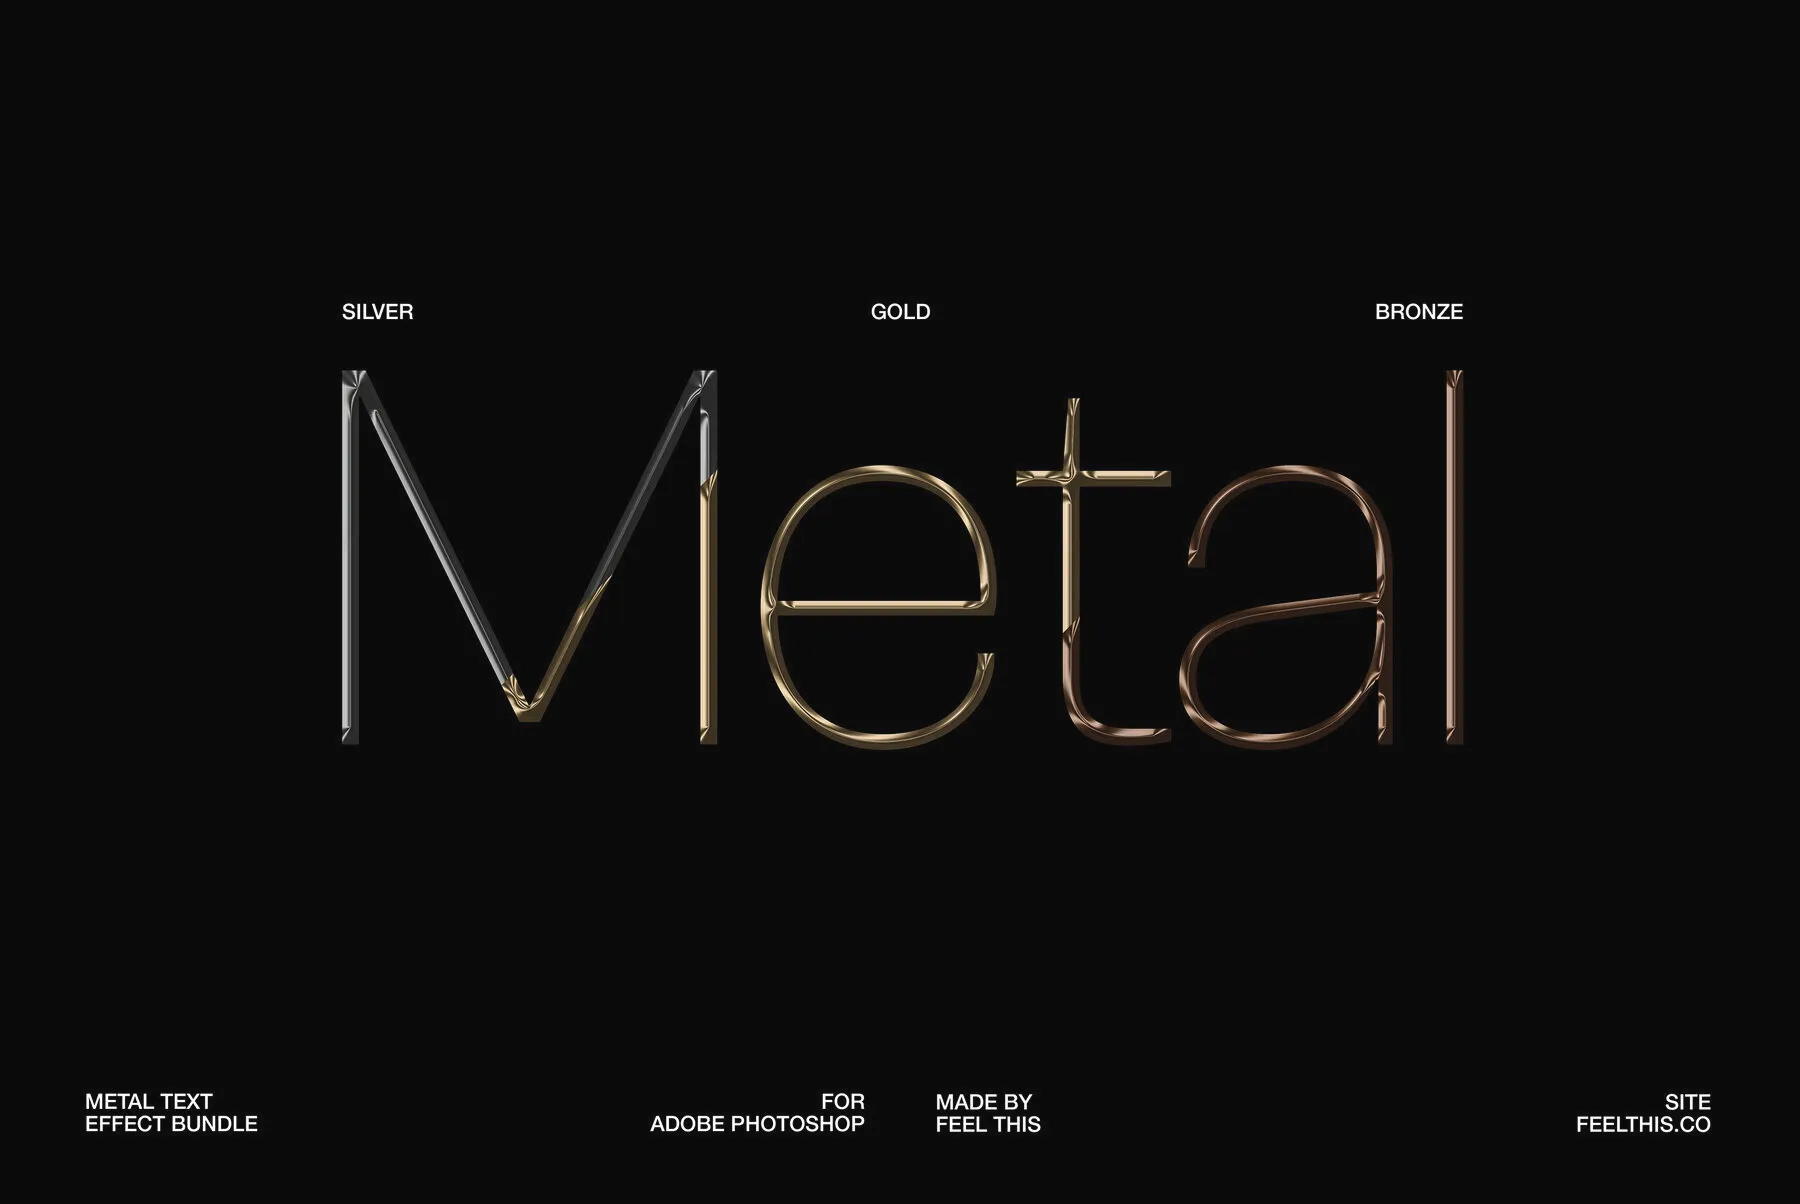 Metal Text Effects